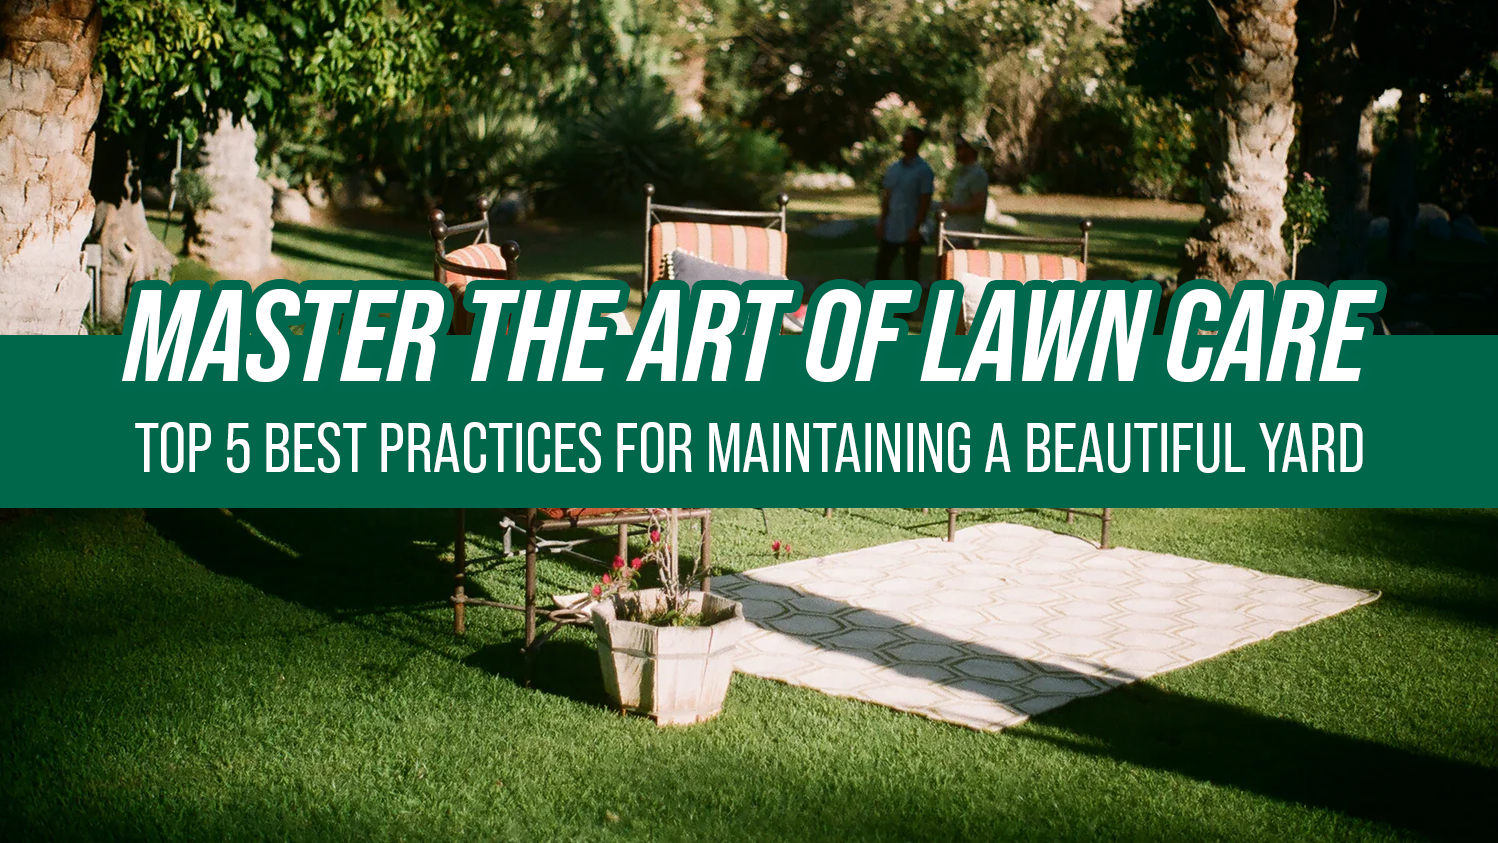 Master the Art of Lawn Care: Top 5 Best Practices for Maintaining a Beautiful Yard